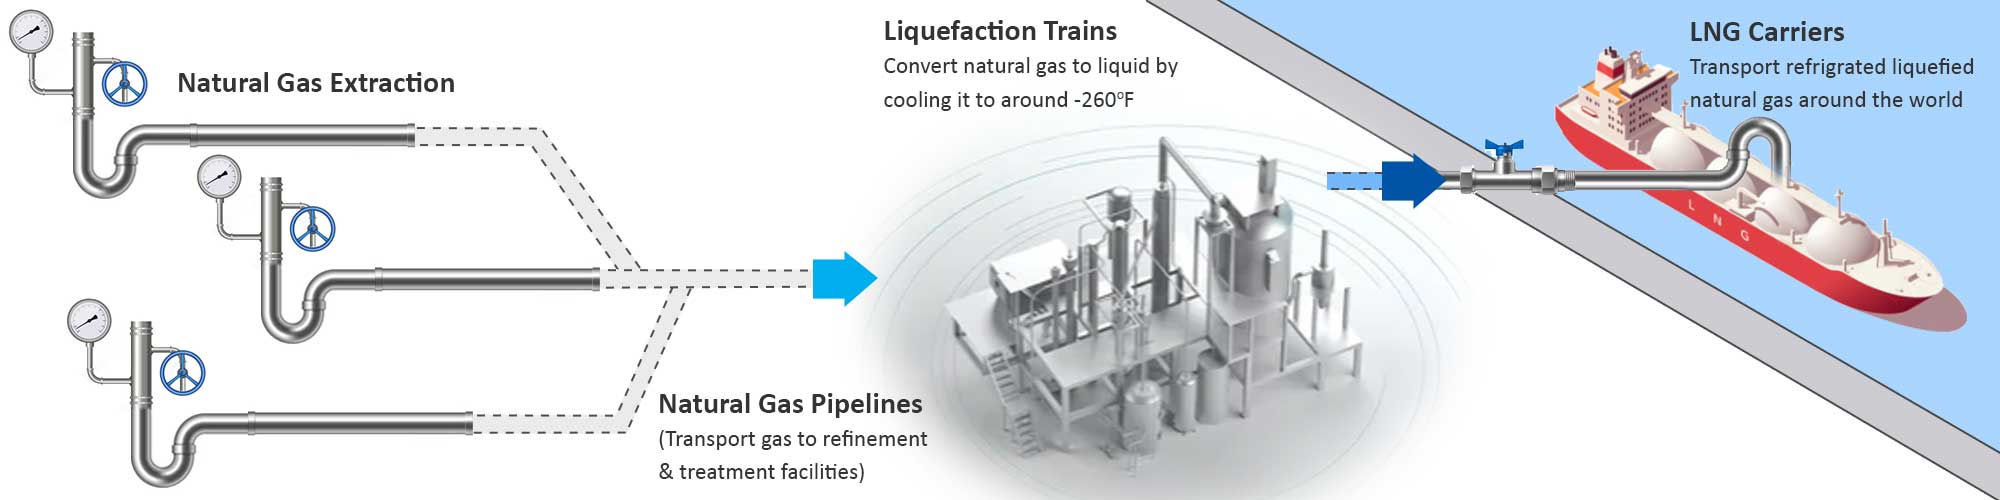 LNG Schematic - Cryogenic Applications 